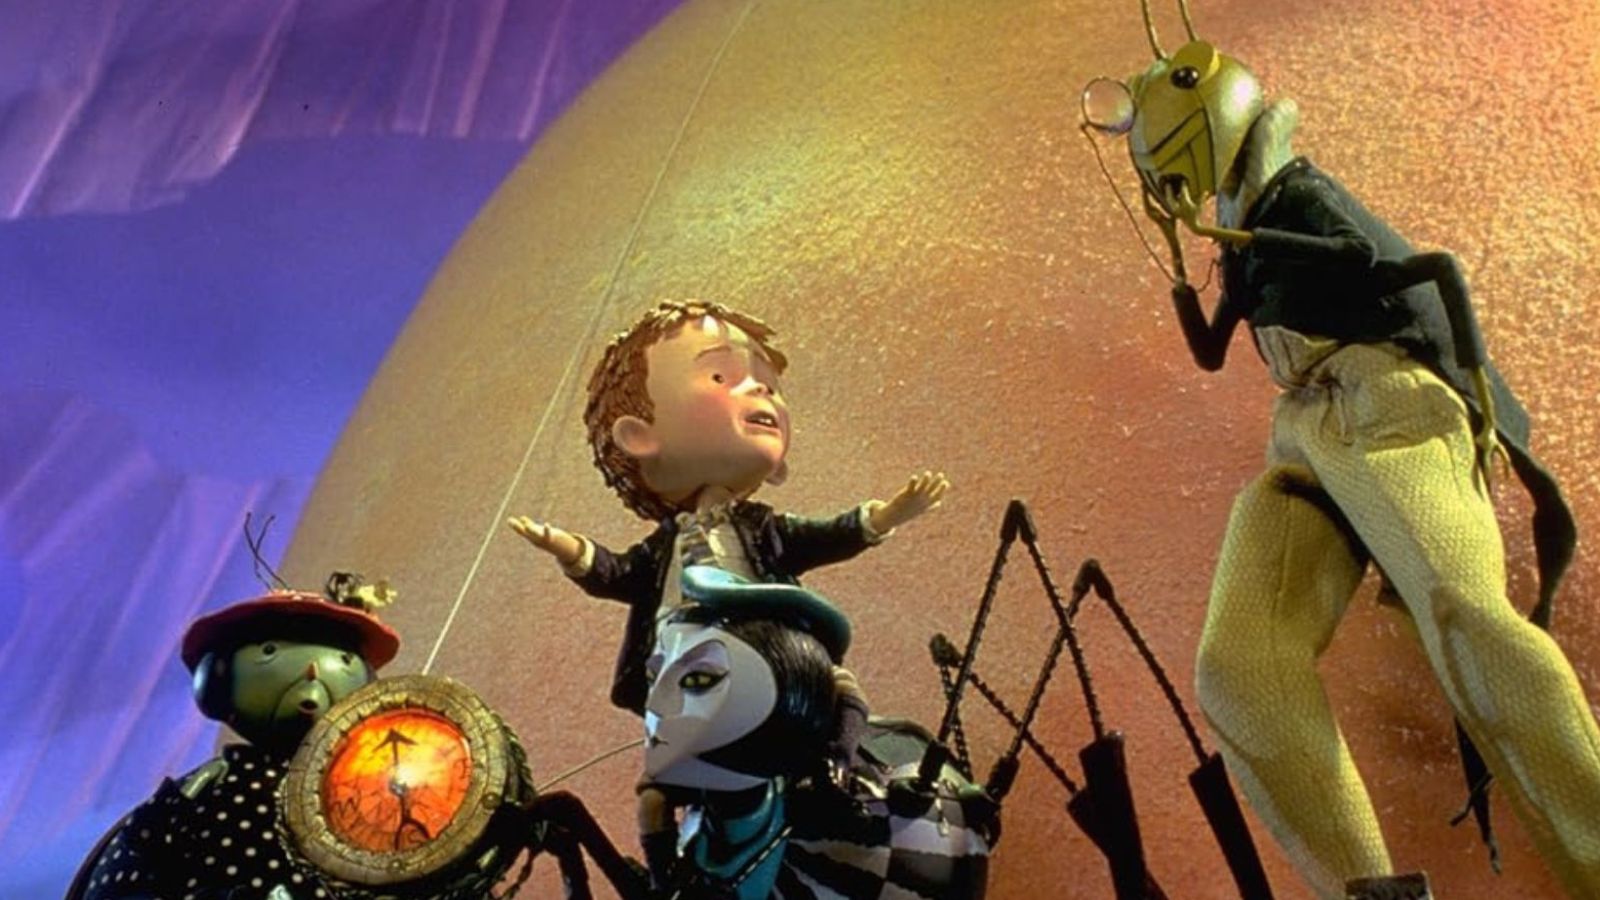 <p>A whimsical tale of friendship and adventure, James and the Giant Peach follows a young boy as he embarks on a journey with a group of insect friends. The stop-motion animation, although creative, gave the characters a creepy and unsettling appearance. In particular, the opening scene with the eerie rhino cloud was particularly unnerving.</p>